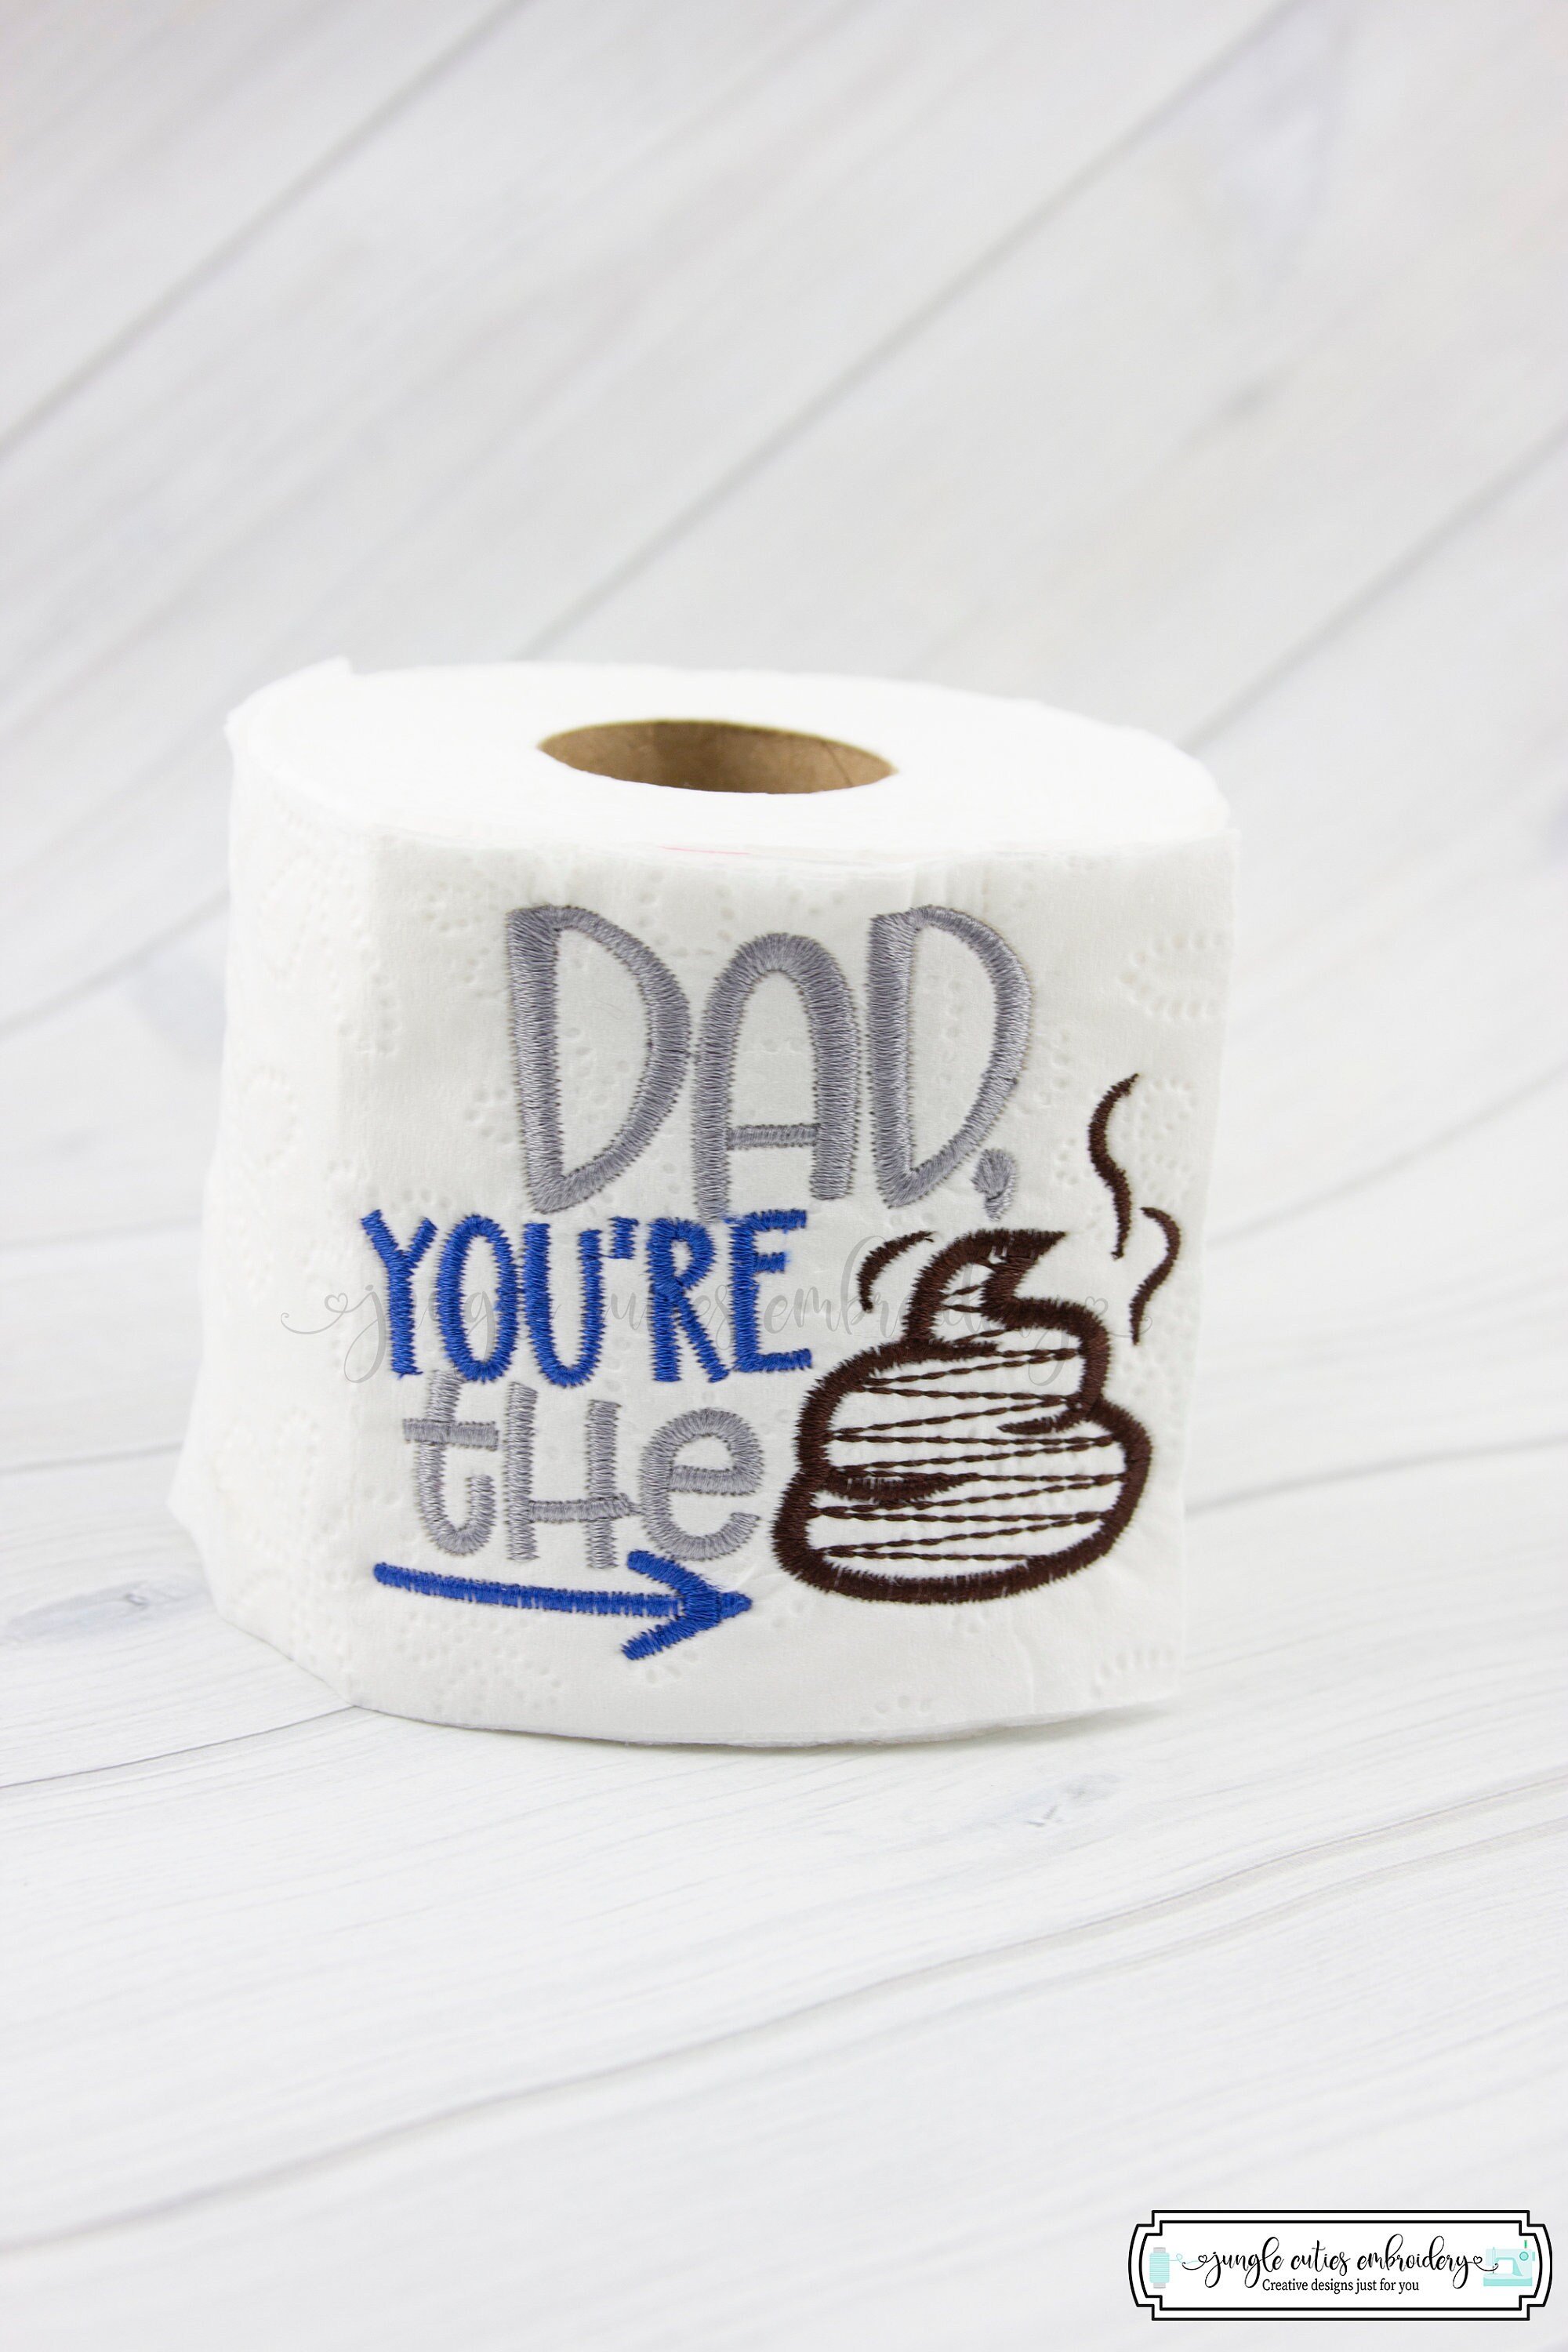 Dad, You're the ! Funny Toilet Paper Dad Gift - The Writing's on the Roll